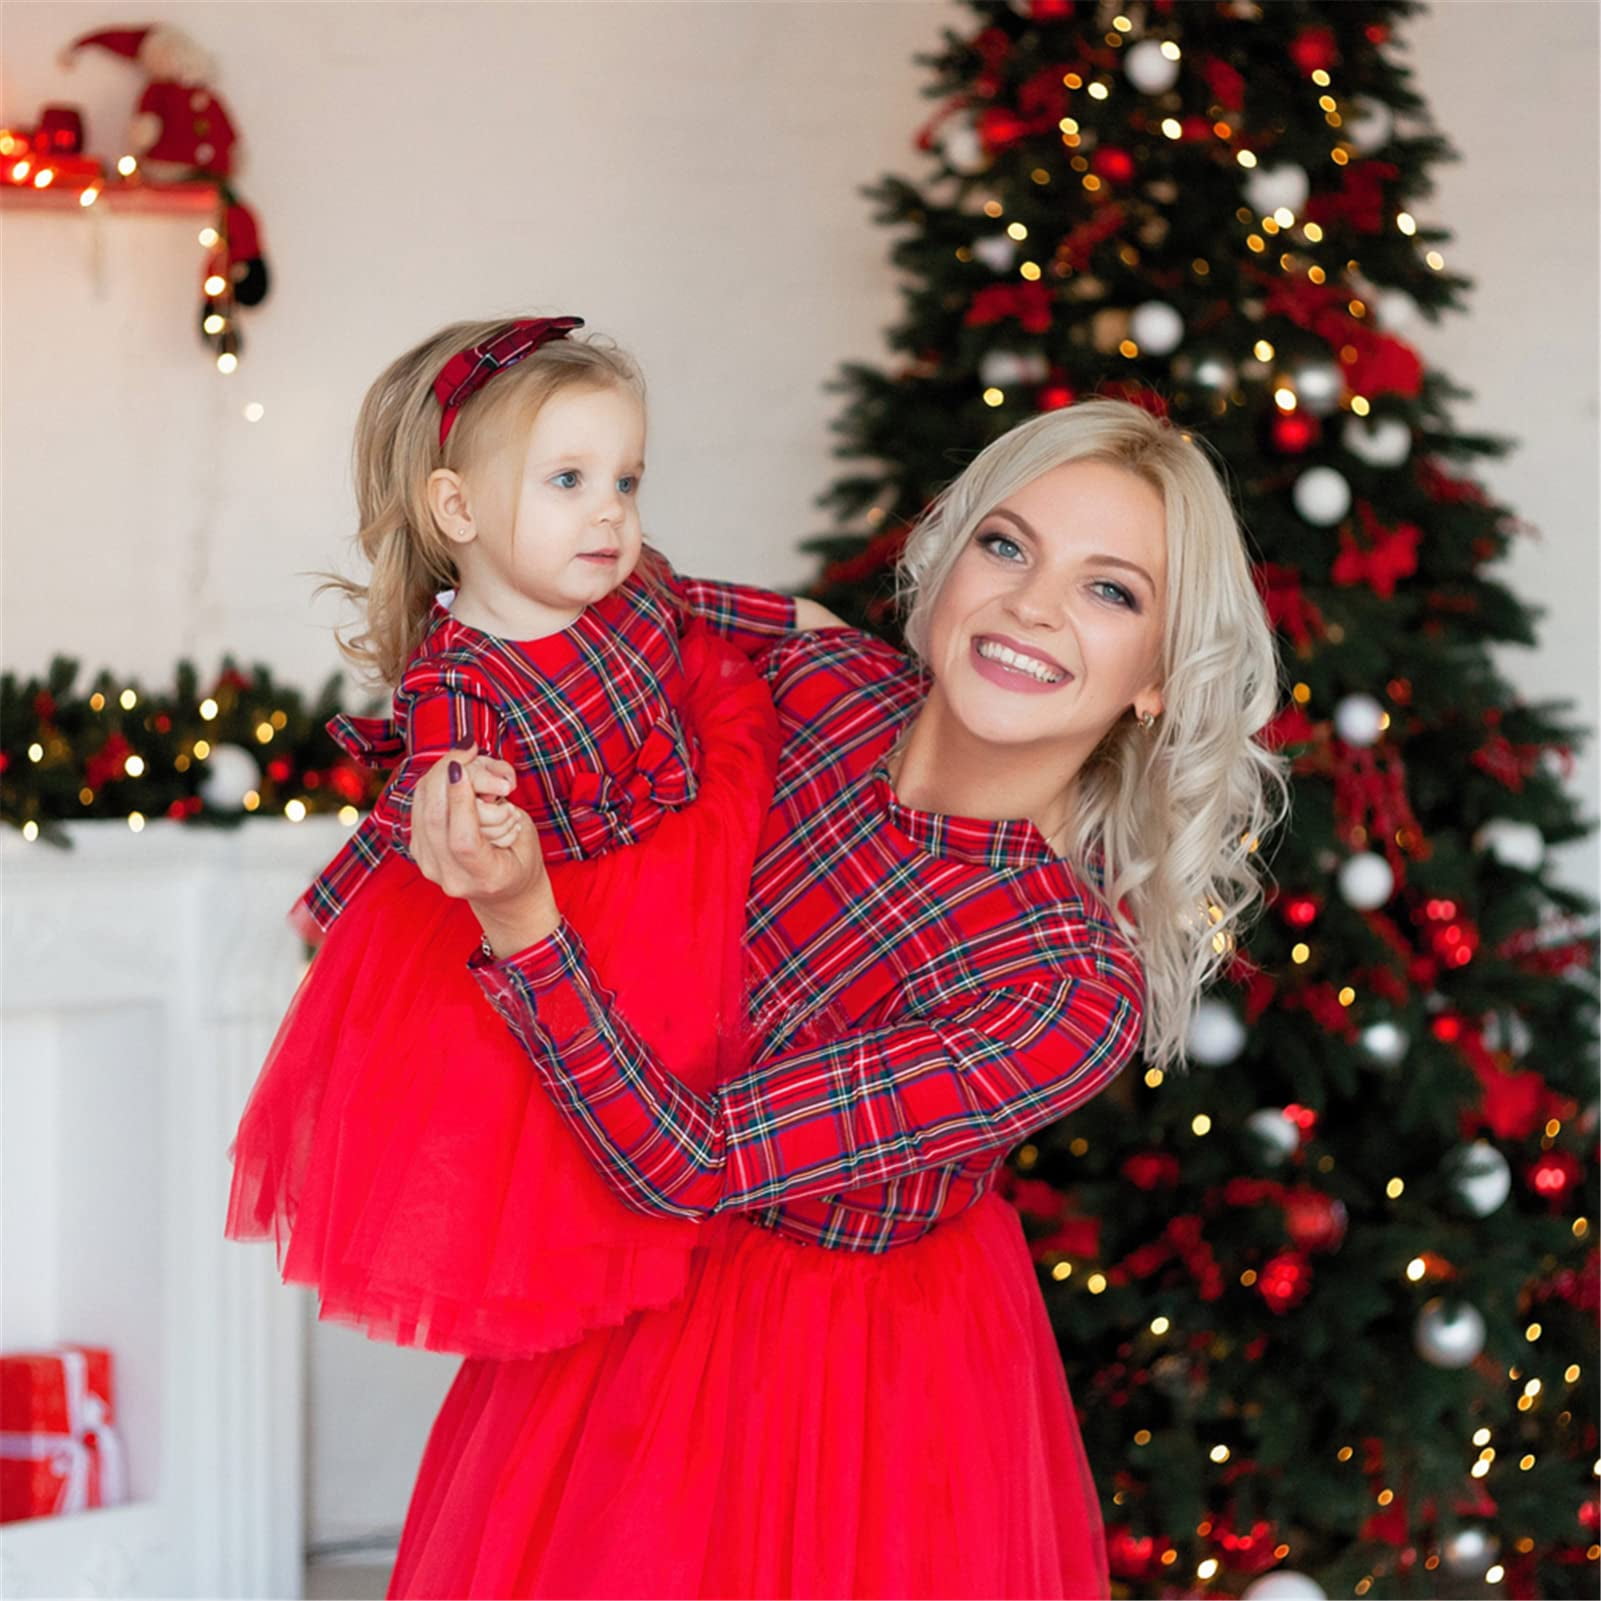 Mother & Daughter Matching Outfits Ideas | Mother daughter dresses  matching, Mother daughter matching outfits, Mom and baby dresses